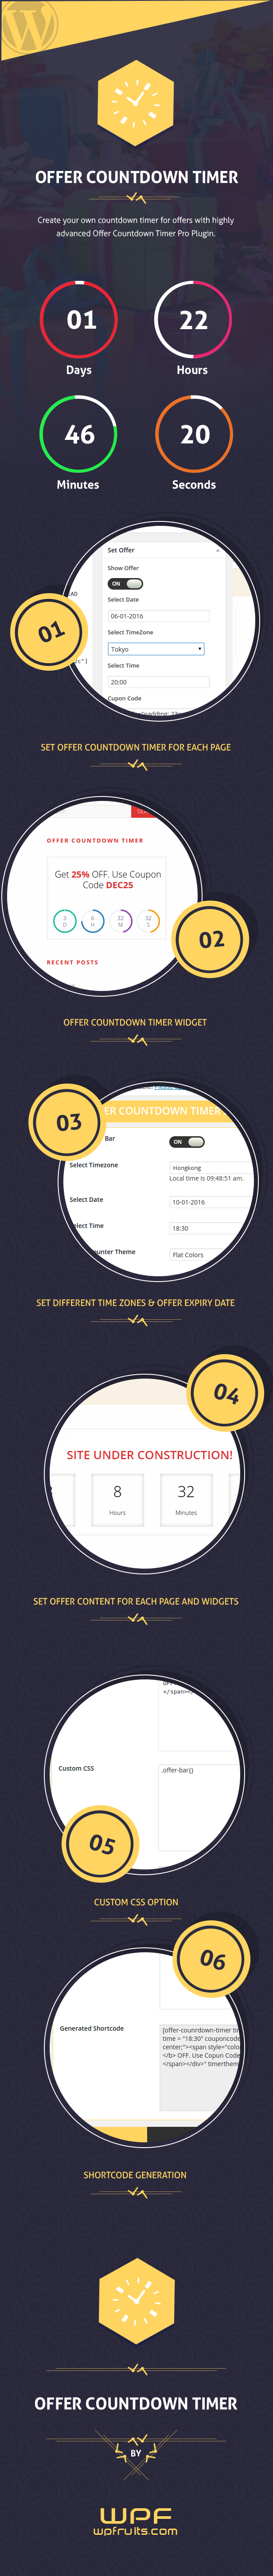 Offer CountDown Timer Pro WordPress Plugin for Events/Products/Offers - 3